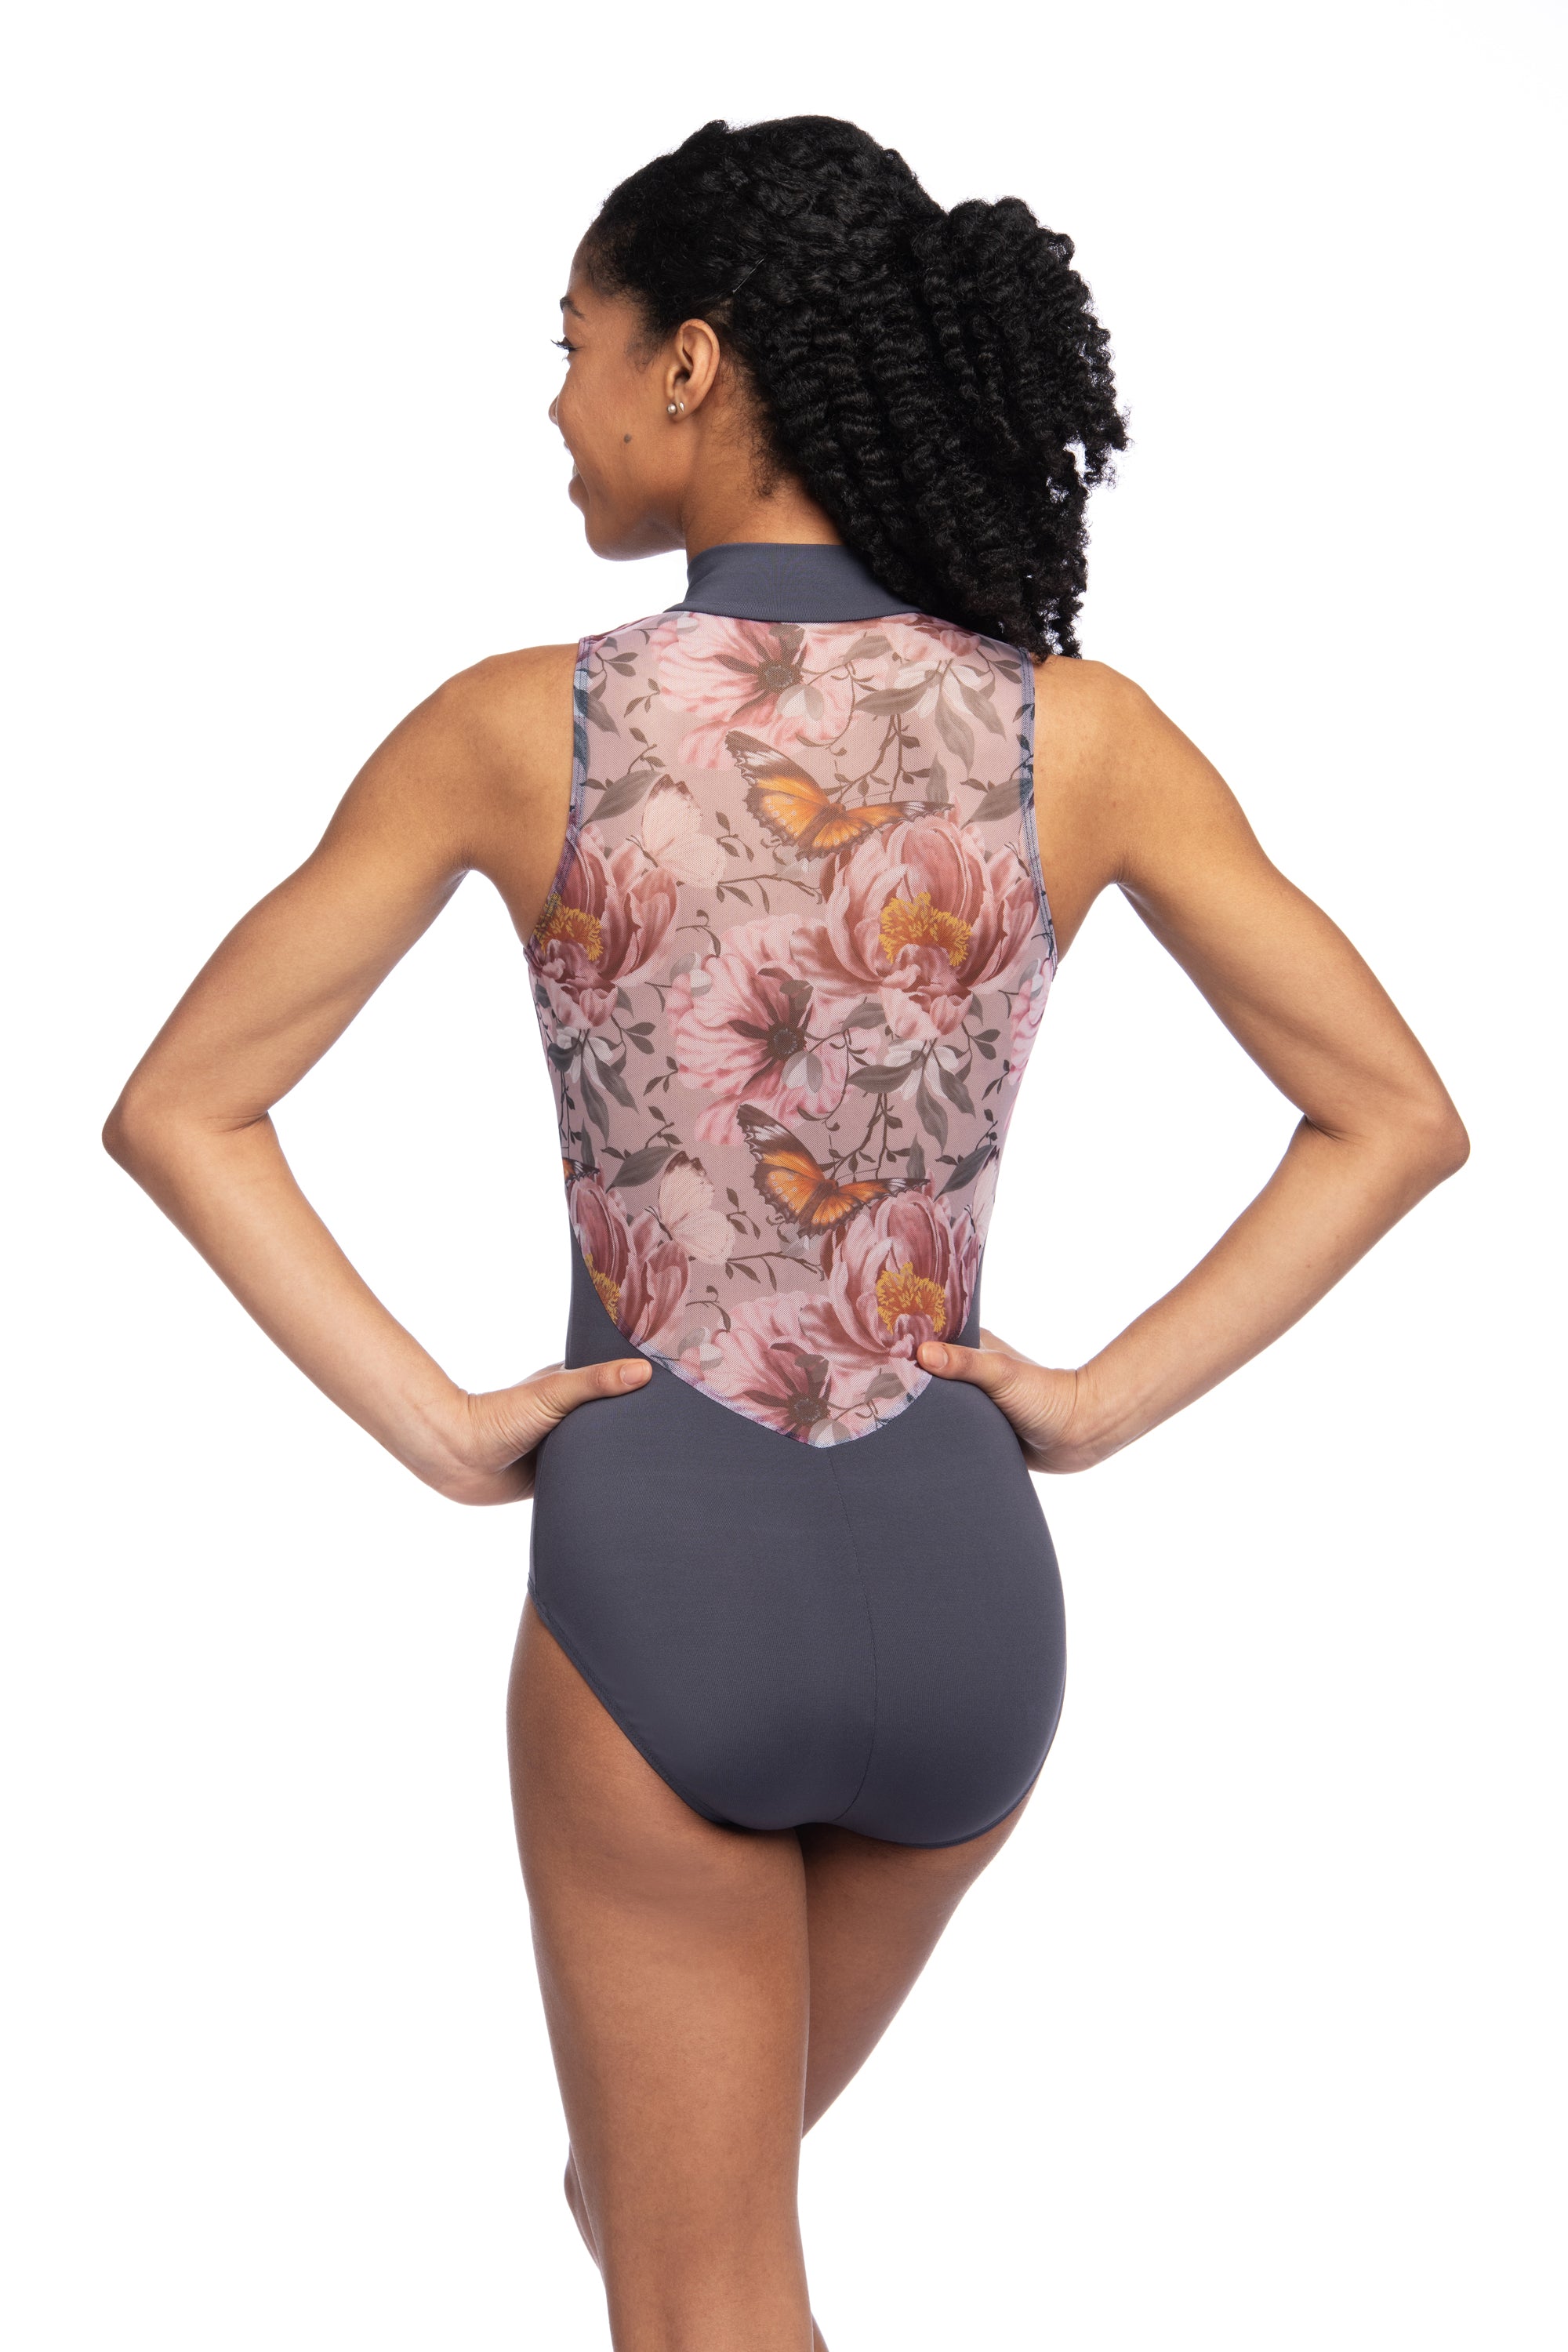 Ainsliewear zip front ballet leotard with butterfly bloom patterned mesh